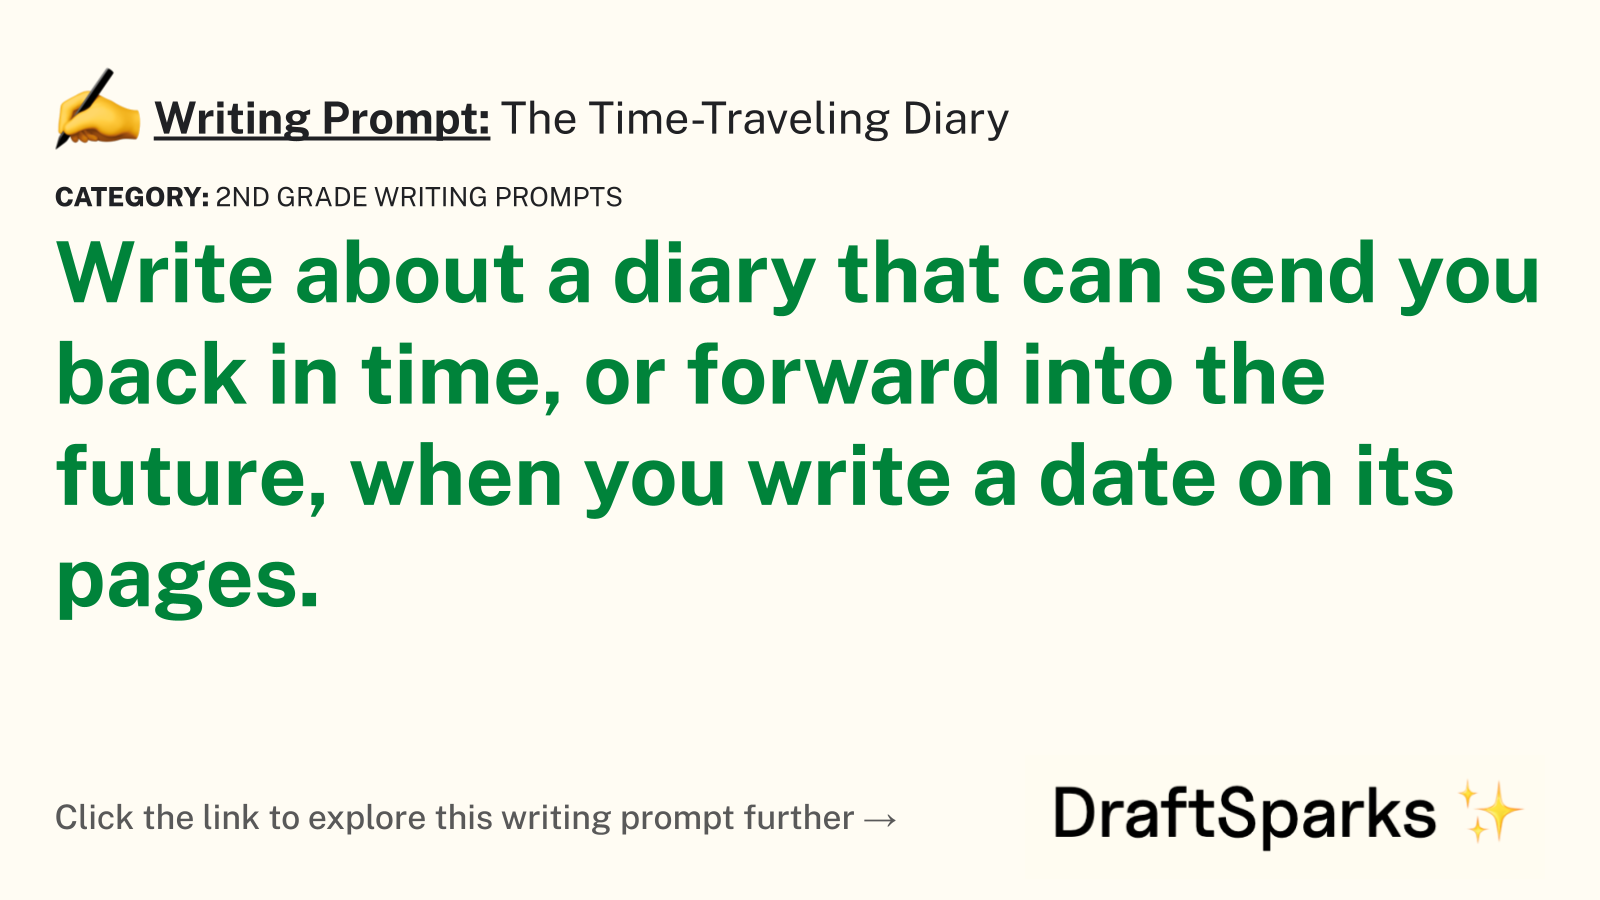 The Time-Traveling Diary